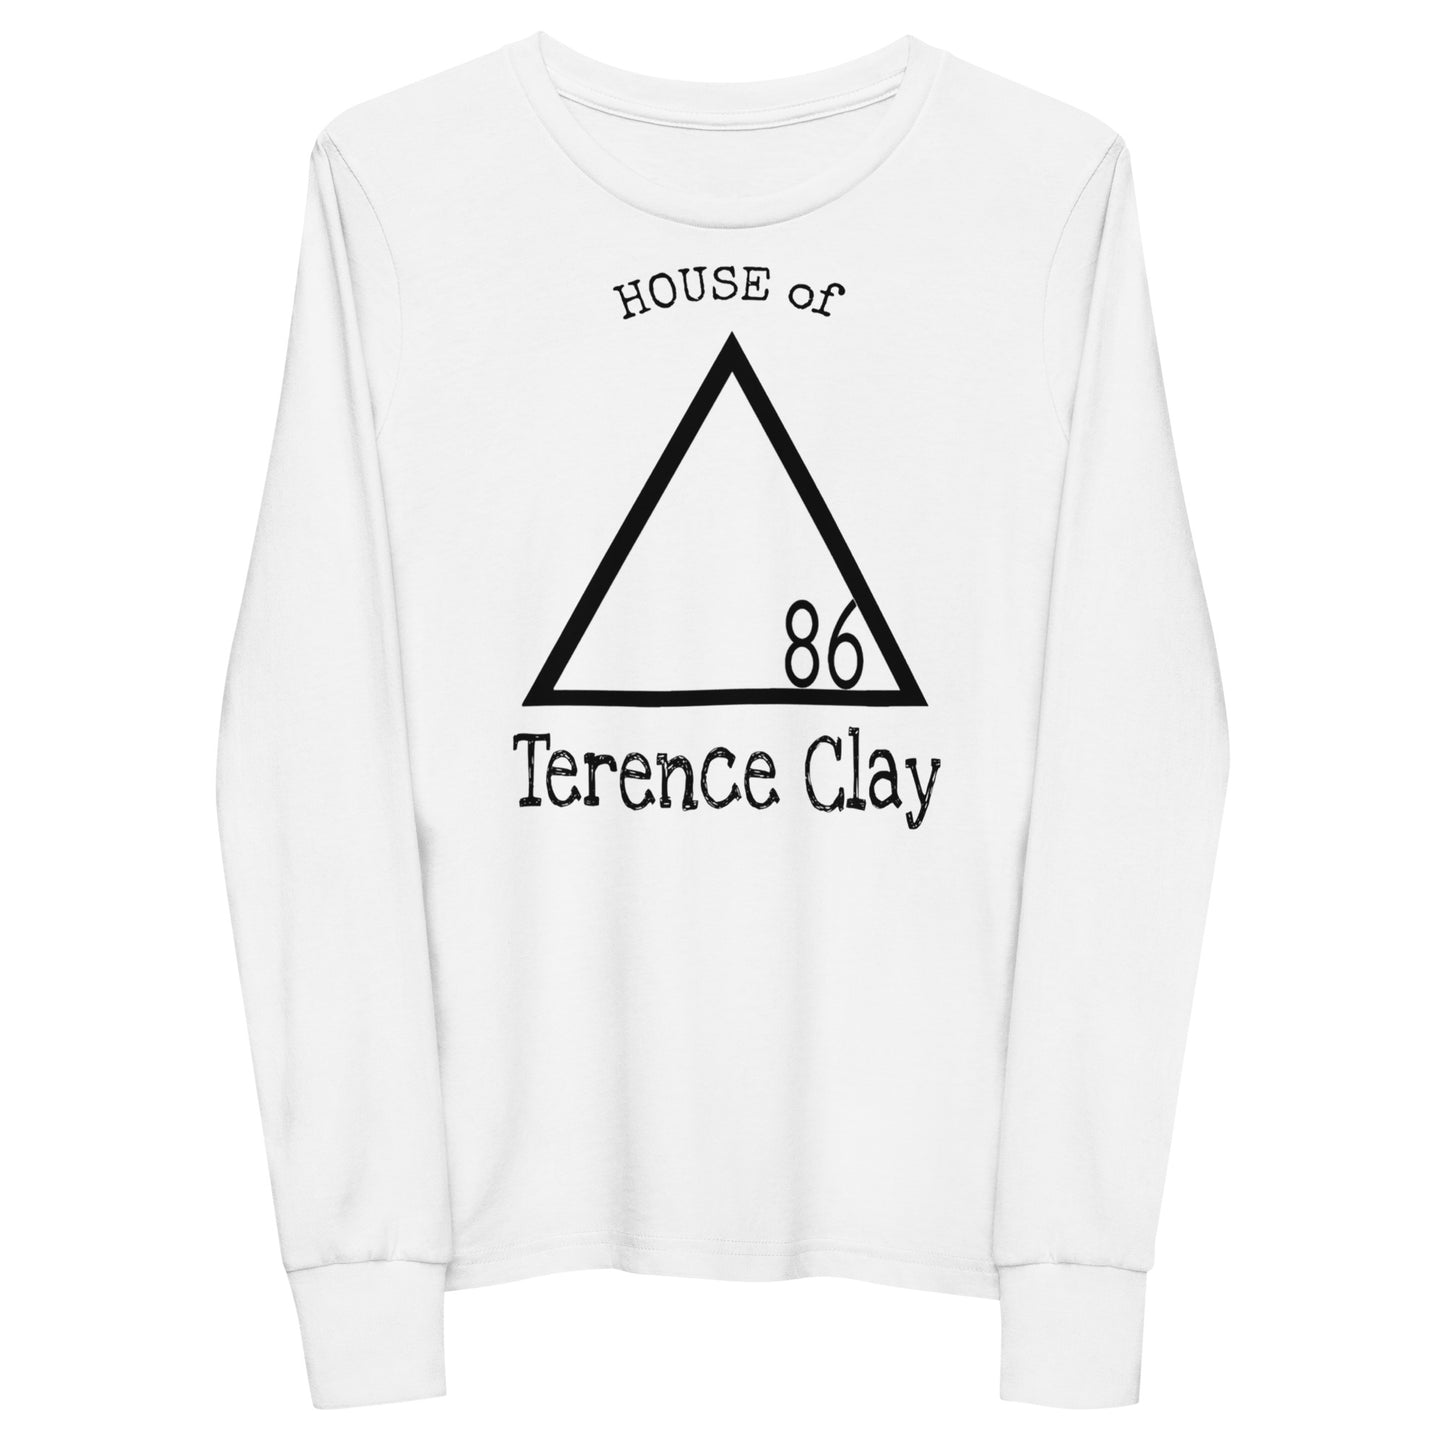 "HOUSE of Terence Clay logo" Youth Size Long-Sleeve Shirt